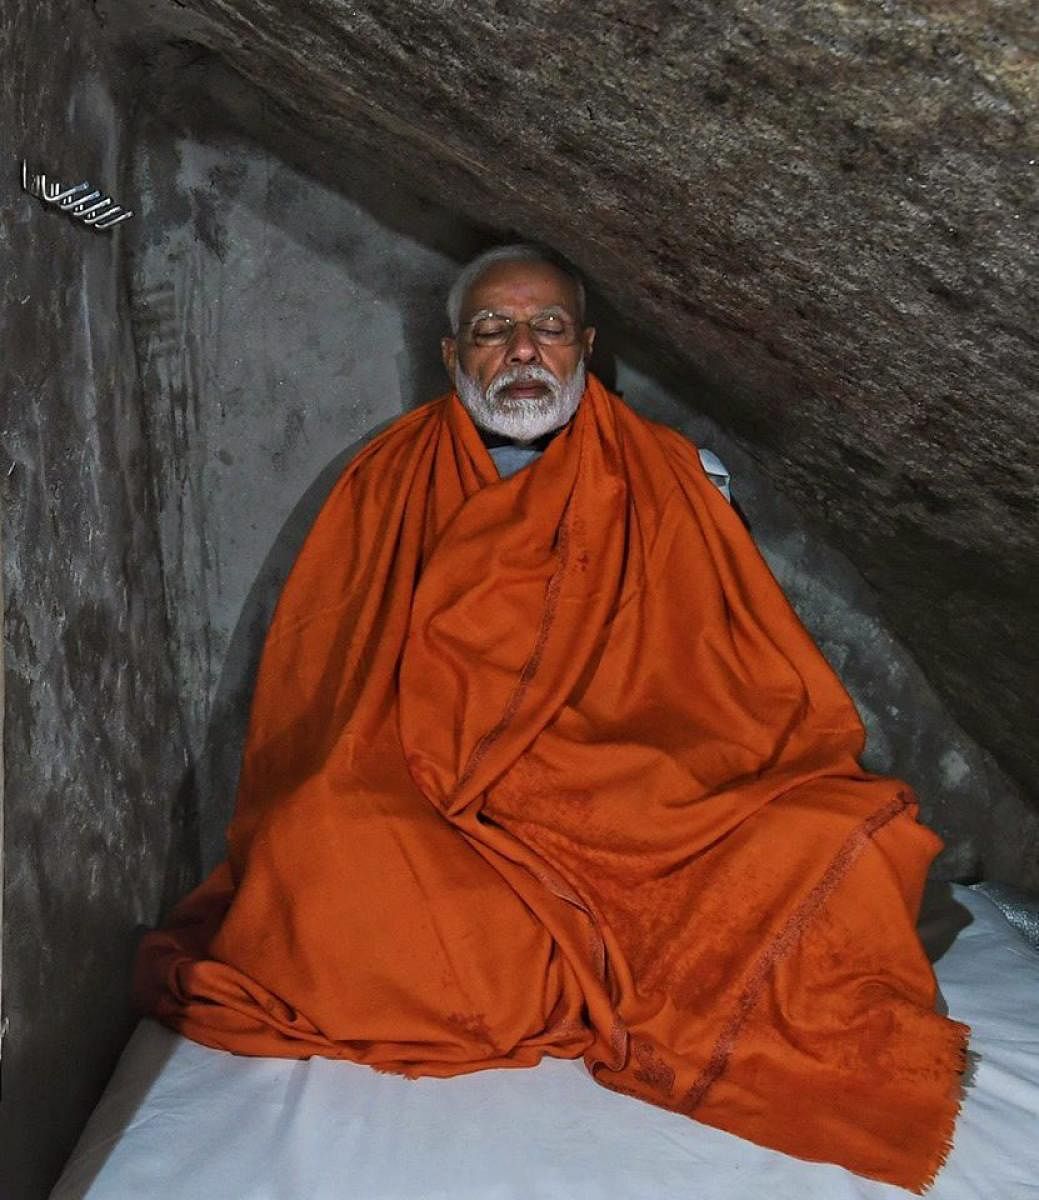 Modi-fied meditation cave now up for rent